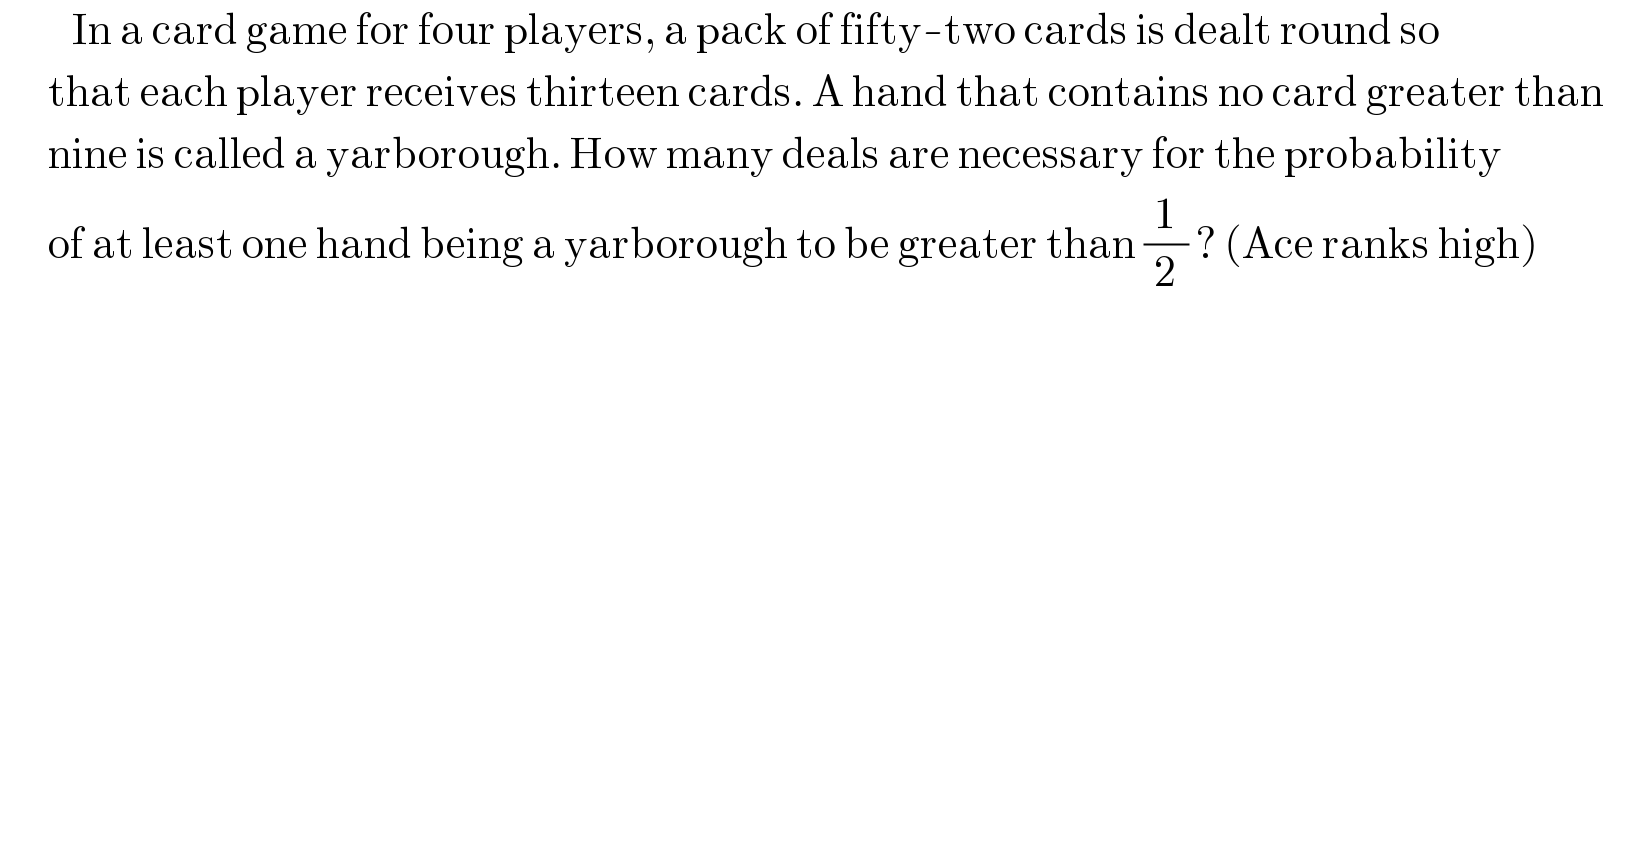          In a card game for four players, a pack of fifty-two cards is dealt round so        that each player receives thirteen cards. A hand that contains no card greater than              nine is called a yarborough. How many deals are necessary for the probability        of at least one hand being a yarborough to be greater than (1/2) ? (Ace ranks high)        